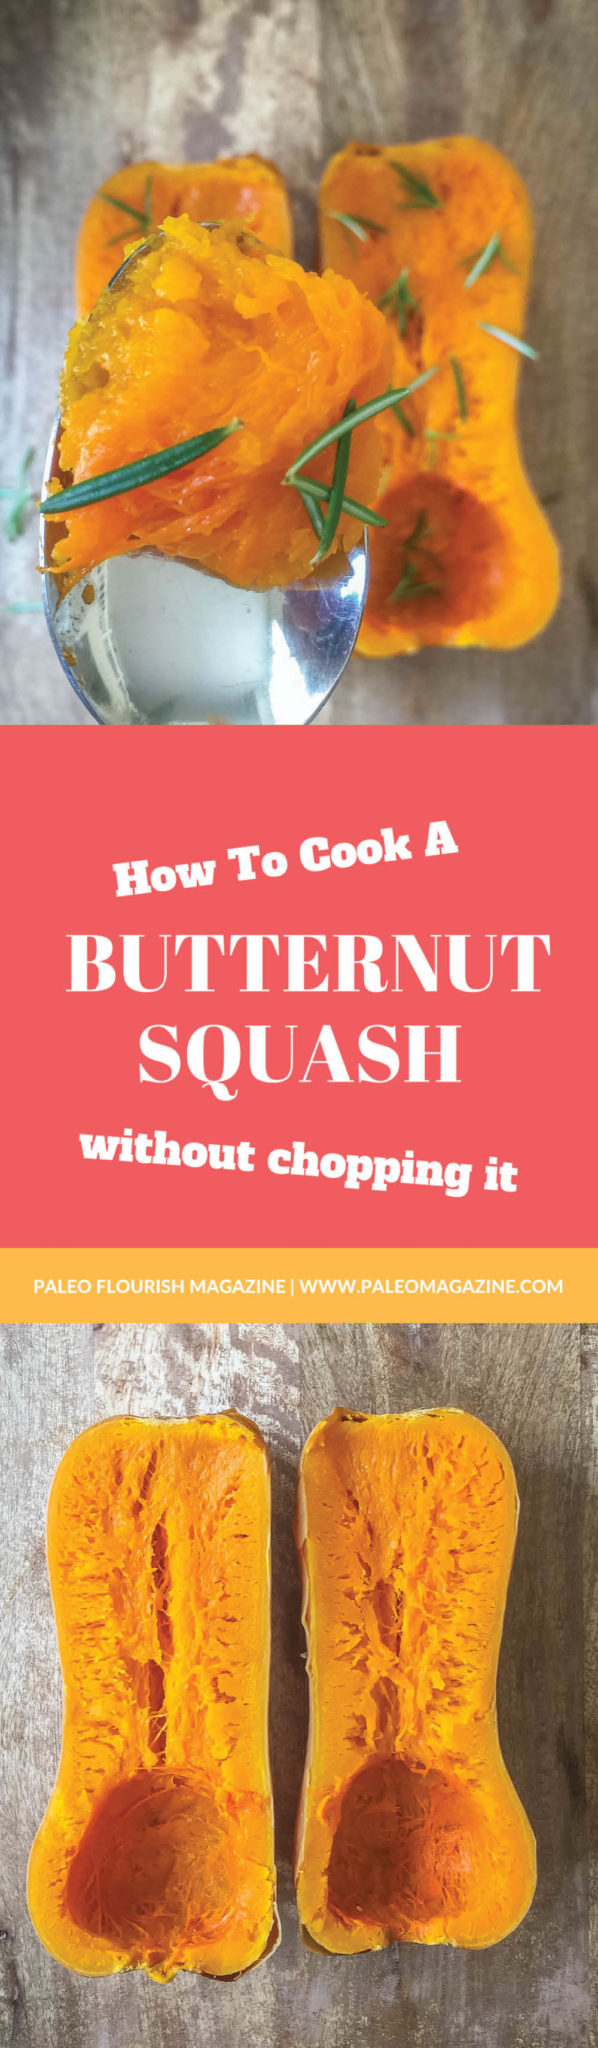 cook butternut squash whole without cutting it in oven or in slow cooker or crockpot #butternutsquash #crockpot https://paleoflourish.com/how-to-cook-a-butternut-squash-without-cutting-it